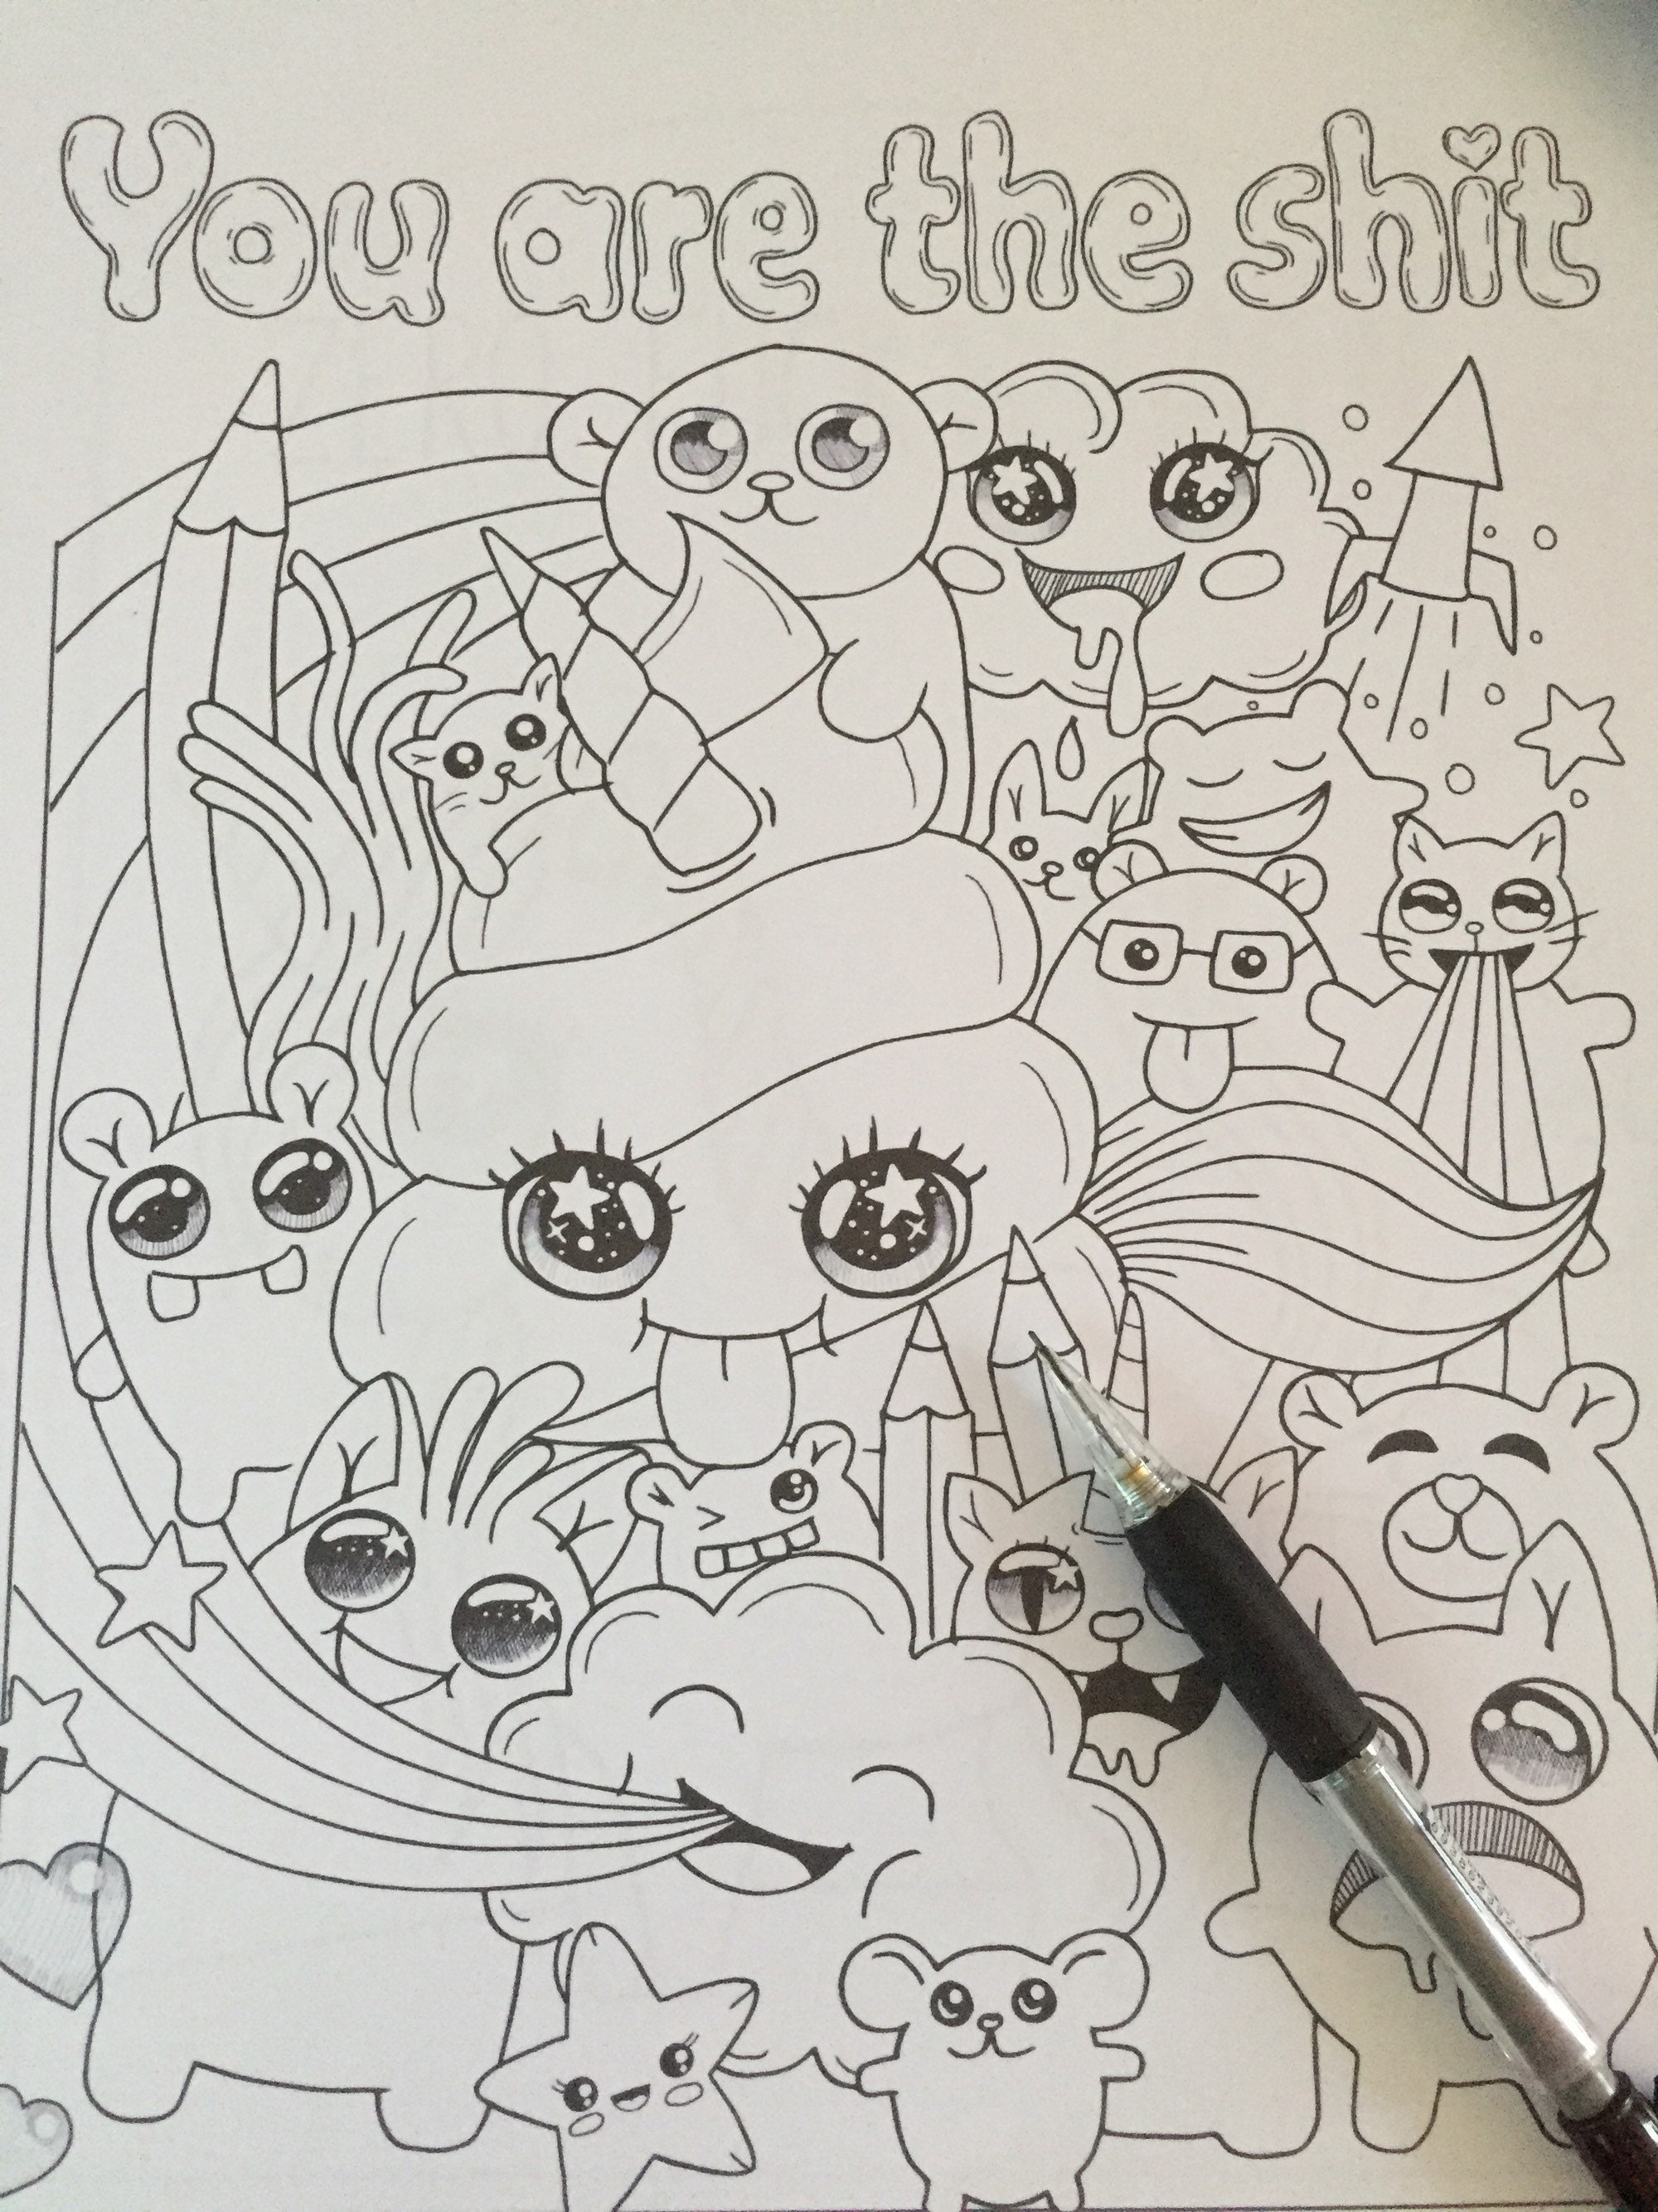 Calm the Fuck Down Swear Word Coloring Book for Adults: Contains  Motivational and funny swear word coloring pages for Stress Relieving a  book by Sophia Caleb